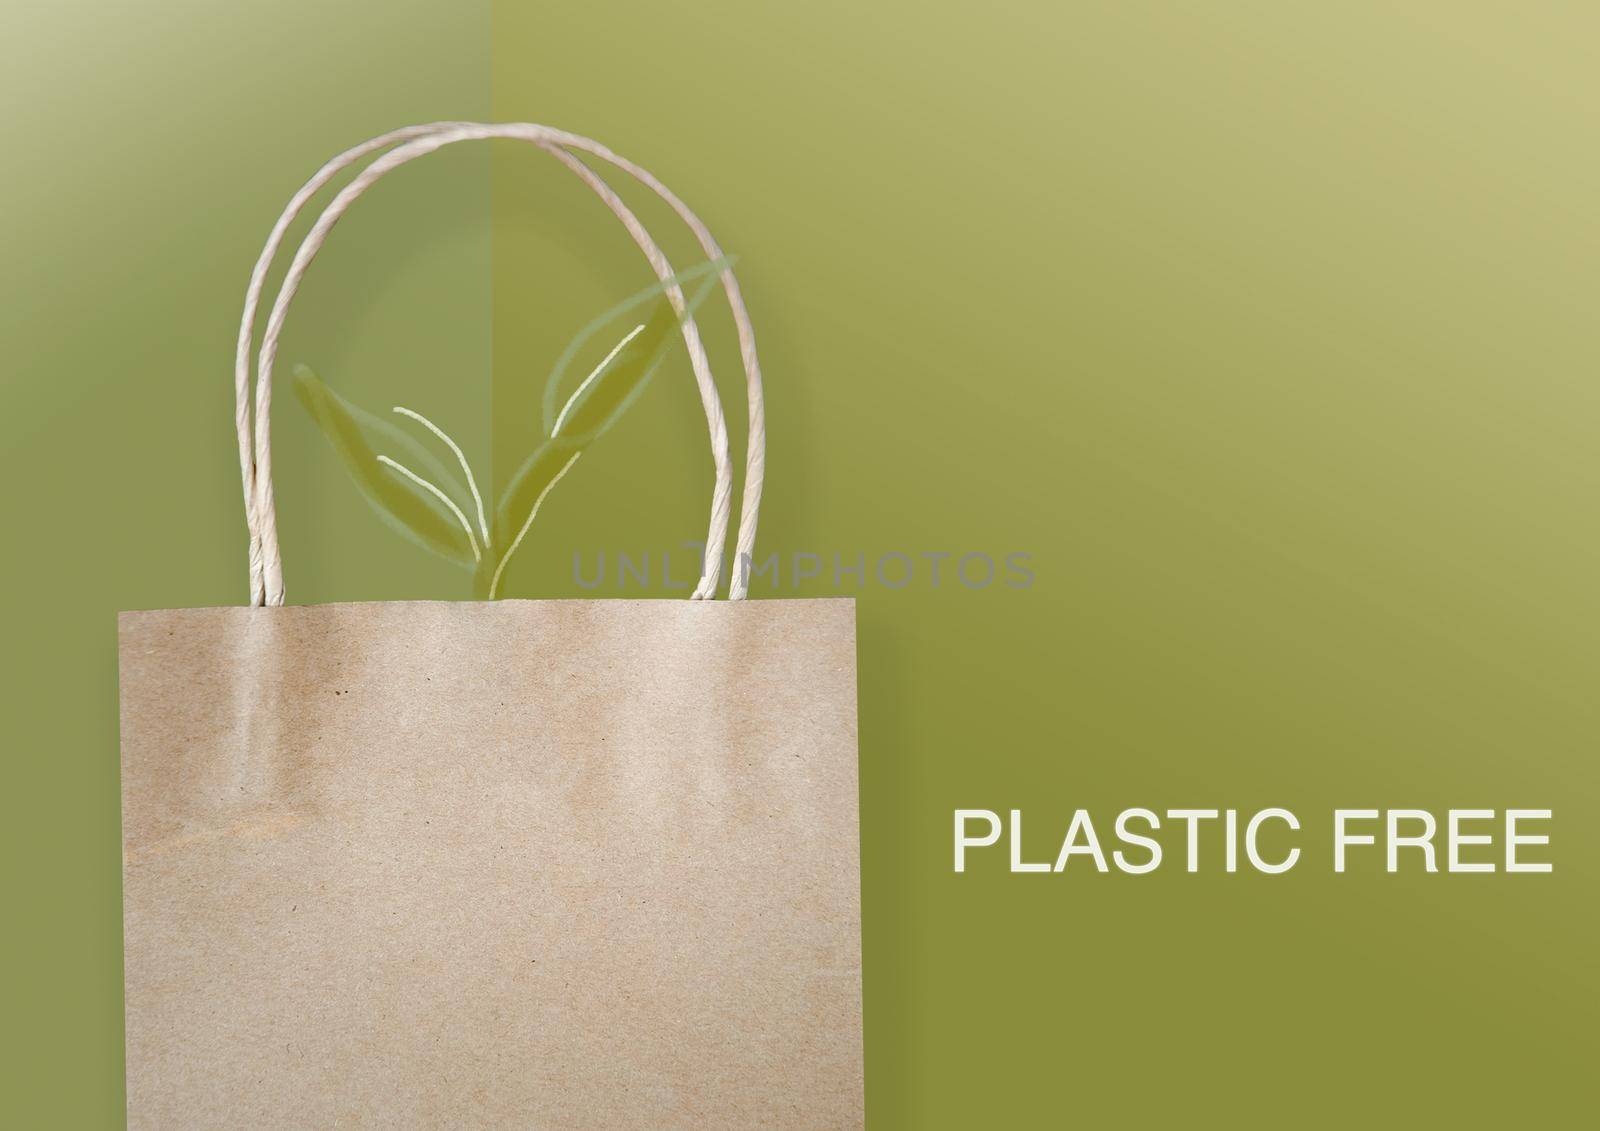 Eco Paper Bag Concept on Green Background by daniaphoto